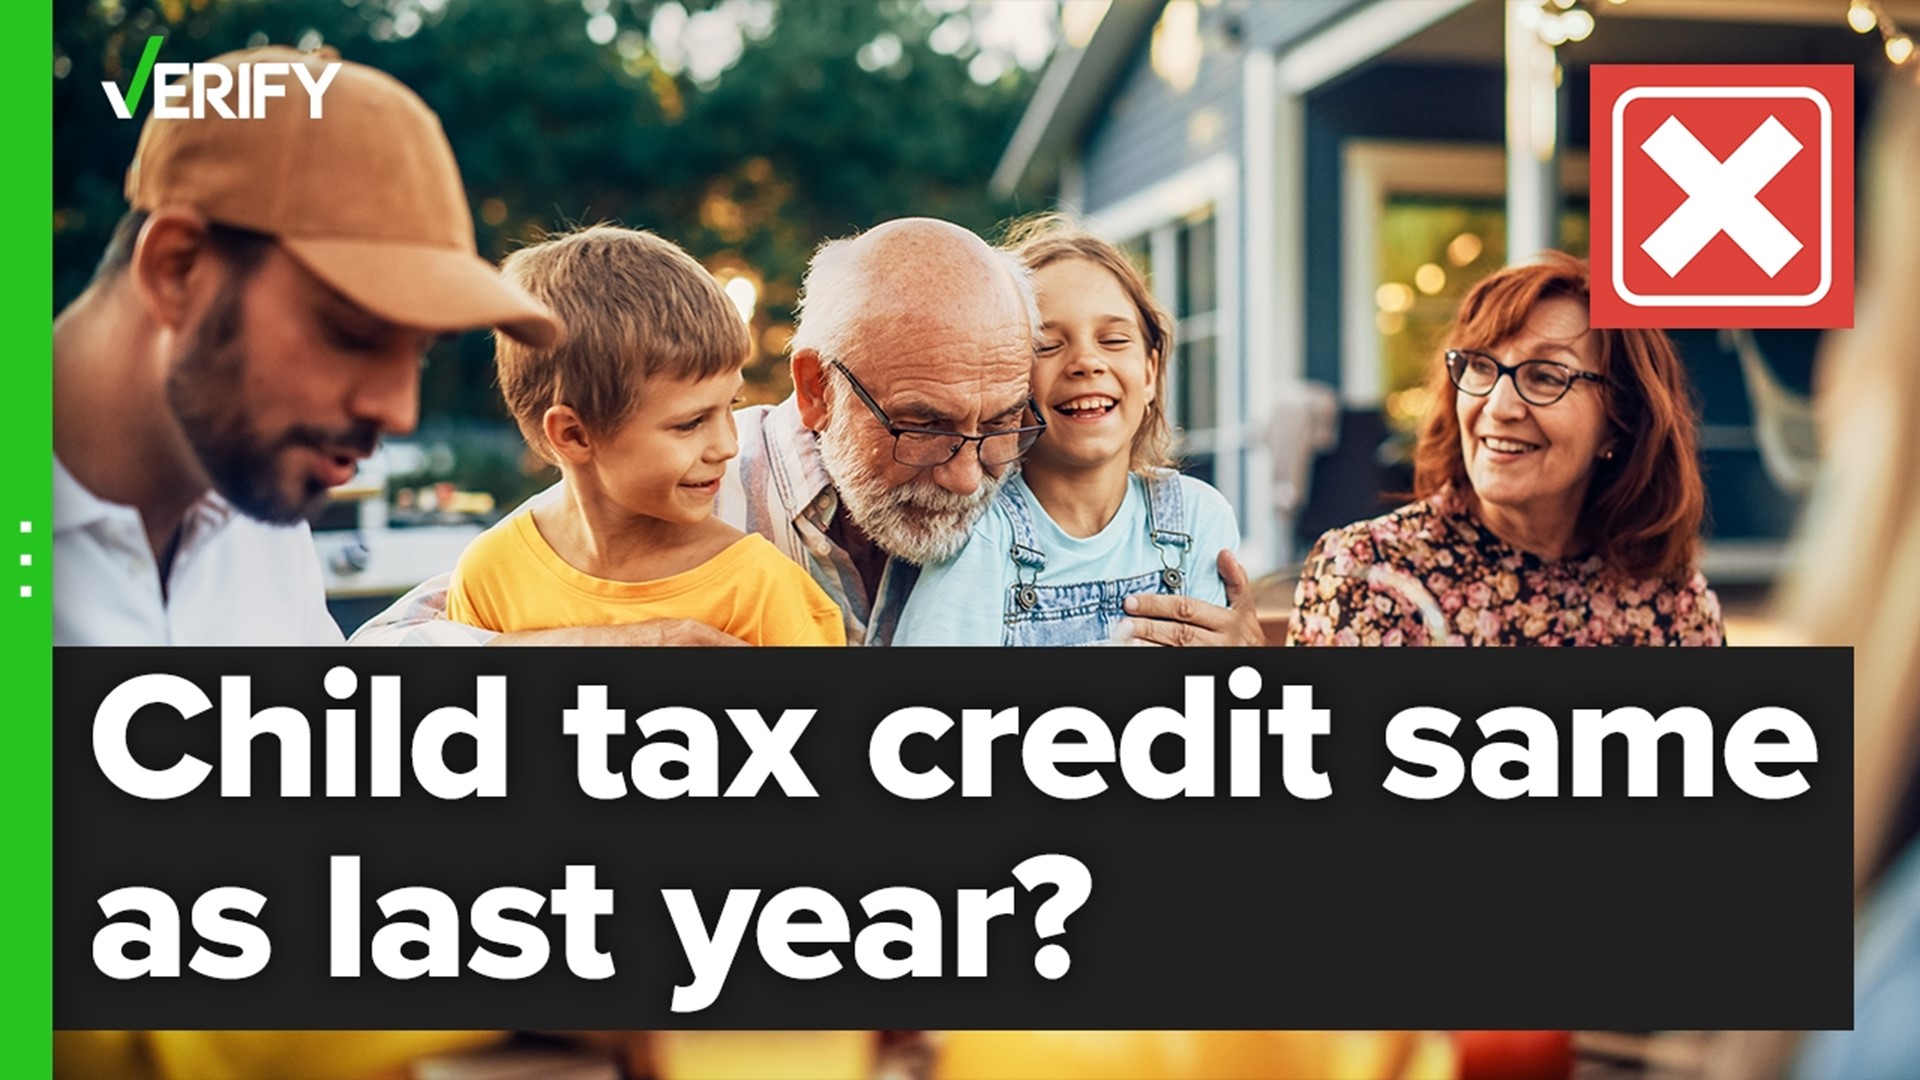 Parents should expect a smaller refund in 2023 due to the child tax credit amount going down. Here’s what to know about income limits and other requirements.